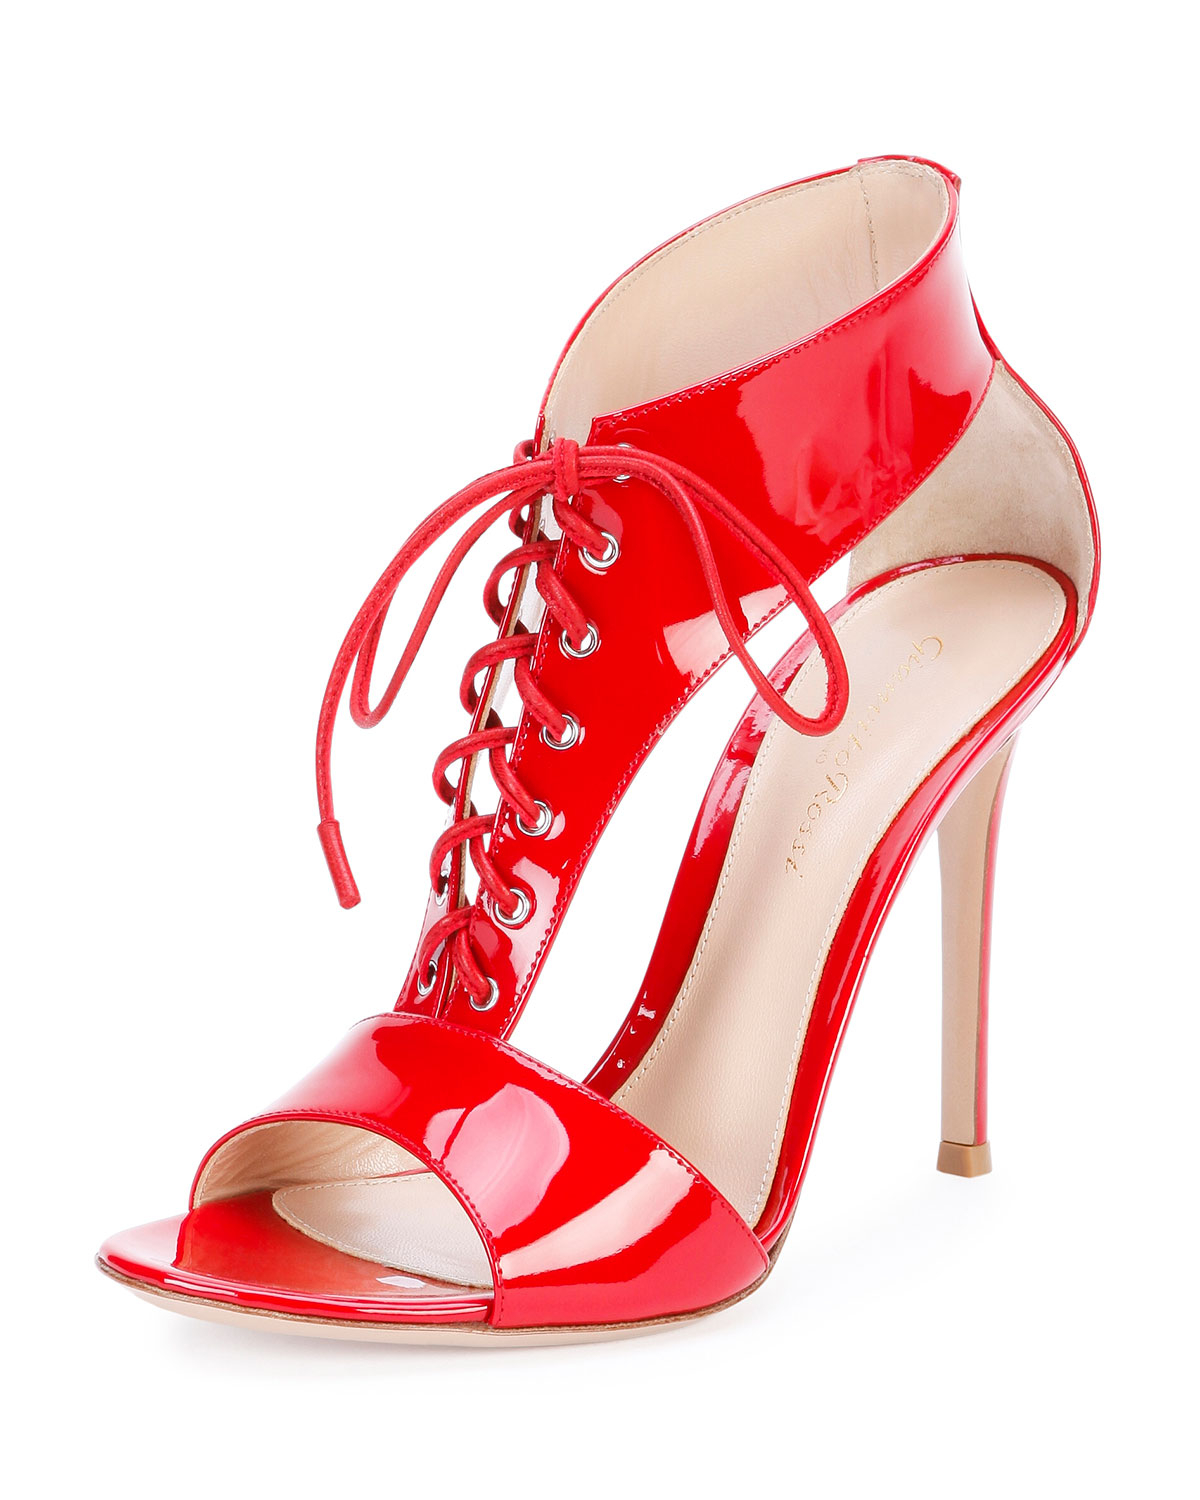 Gianvito rossi T-Strap Patent Lace-Up Sandal in Red | Lyst